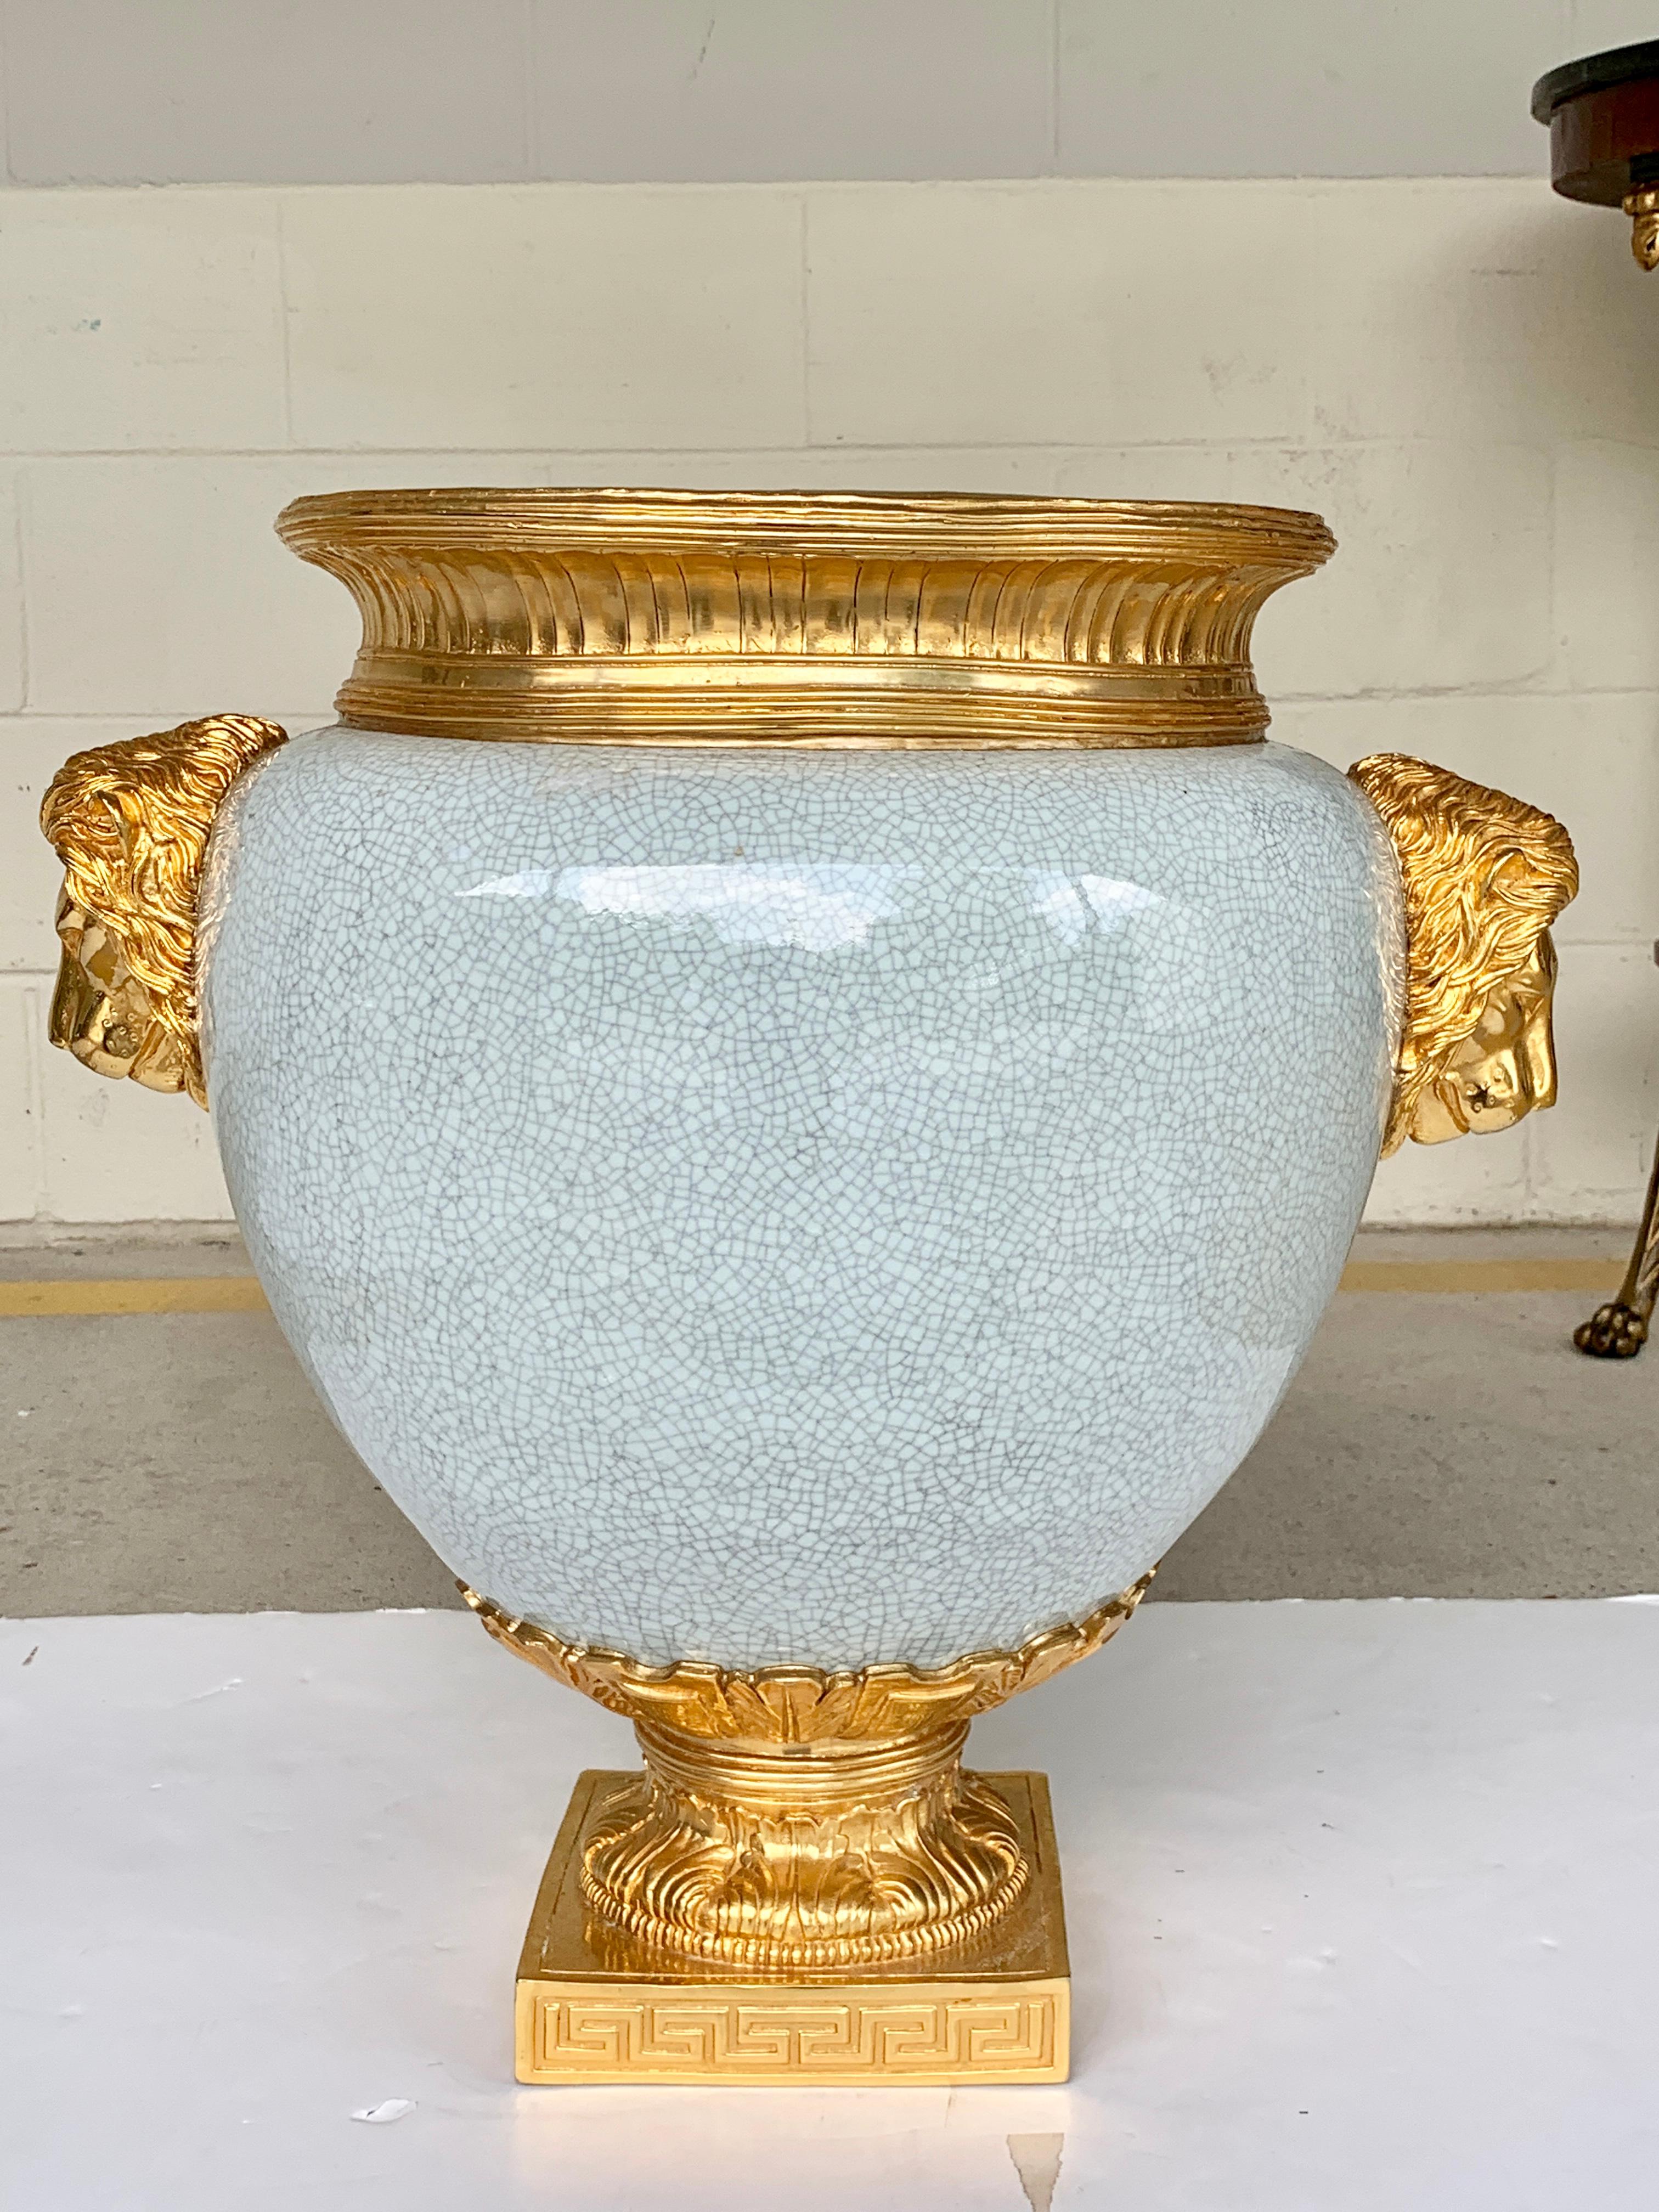 Chinese crackle glaze and ormolu lion motif urn, large beautiful random Chinese crackle vase, with French ormolu mounts, with a 15